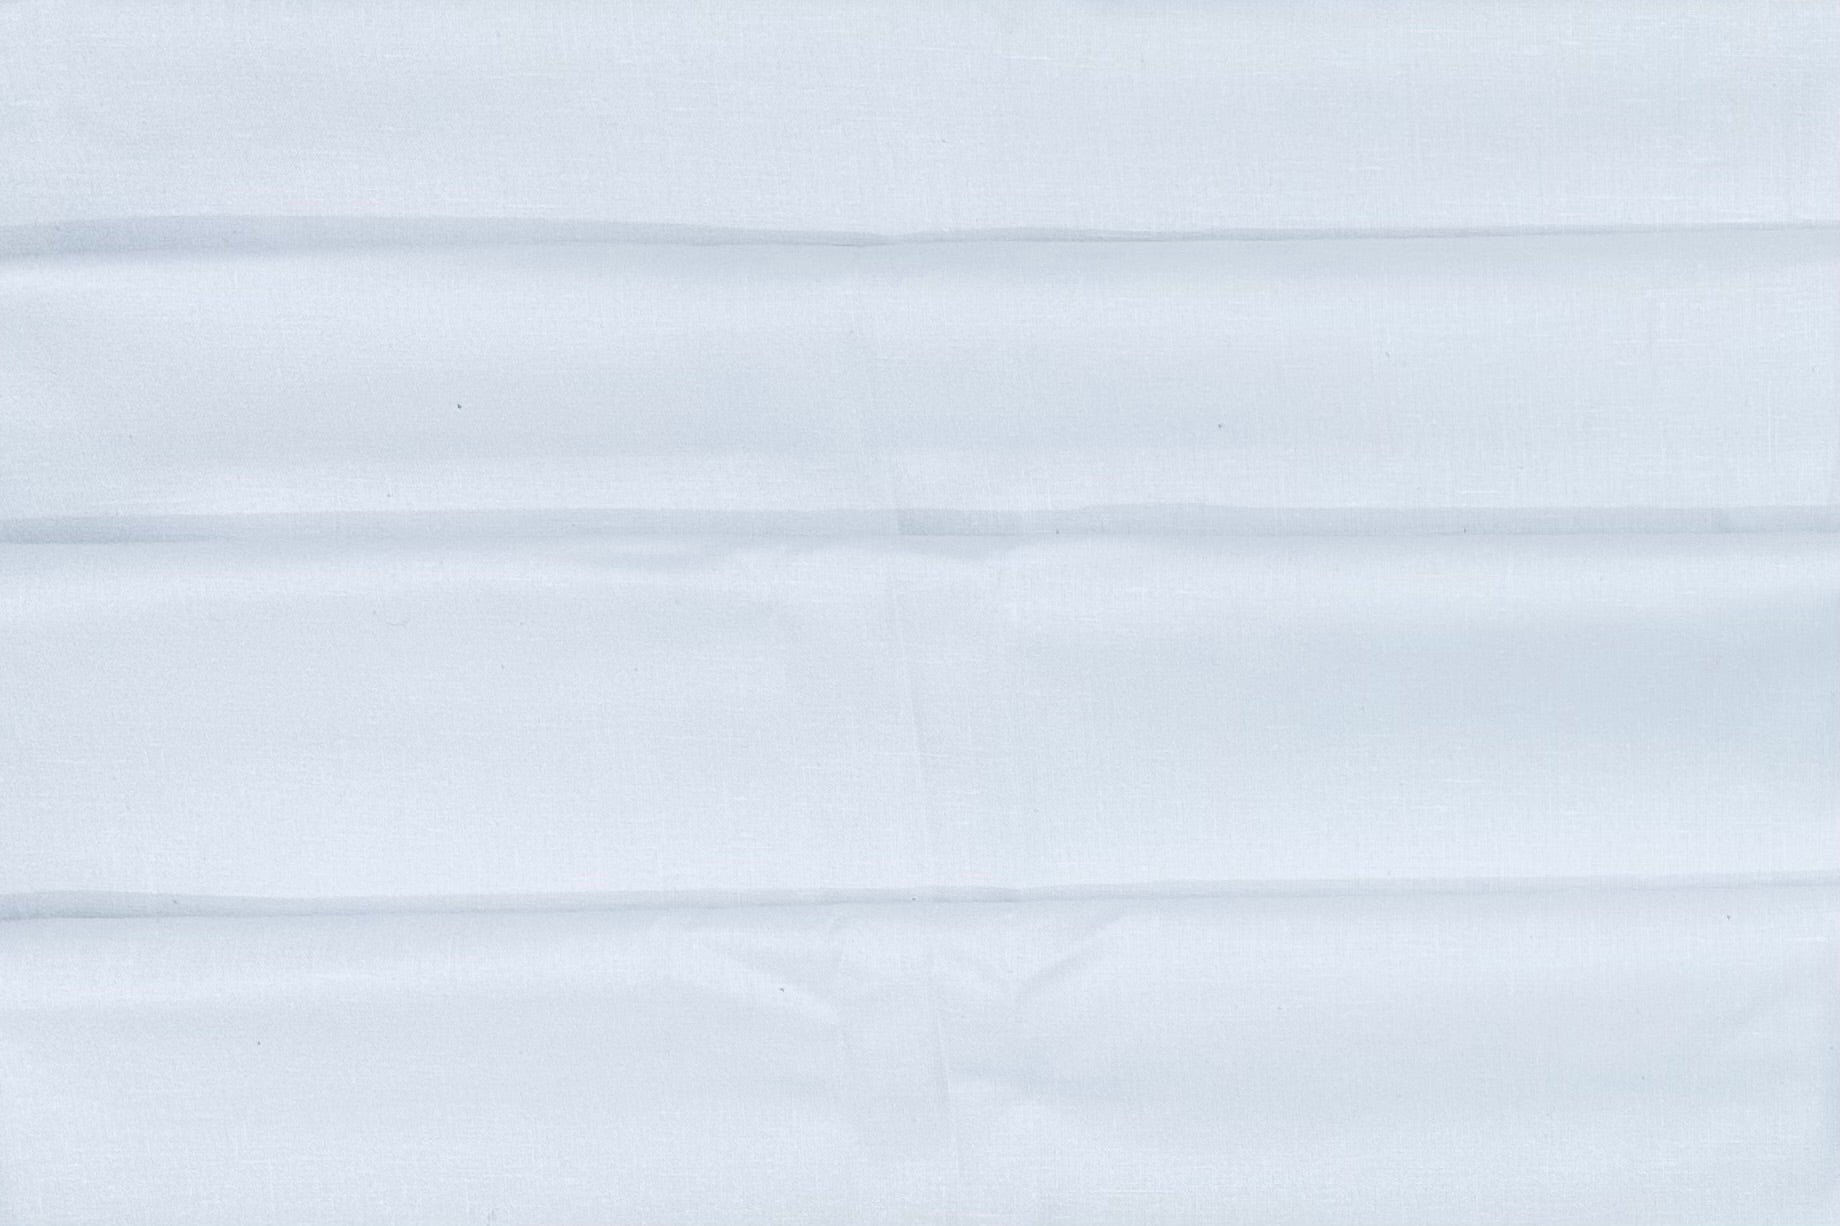 White Plain Heavy Quality Cotton Linen Shirt Fabric (Length-2.25 Meter | Width-34 Inch) Starting at - Just Rs. 749! with Free Shipping & COD Options